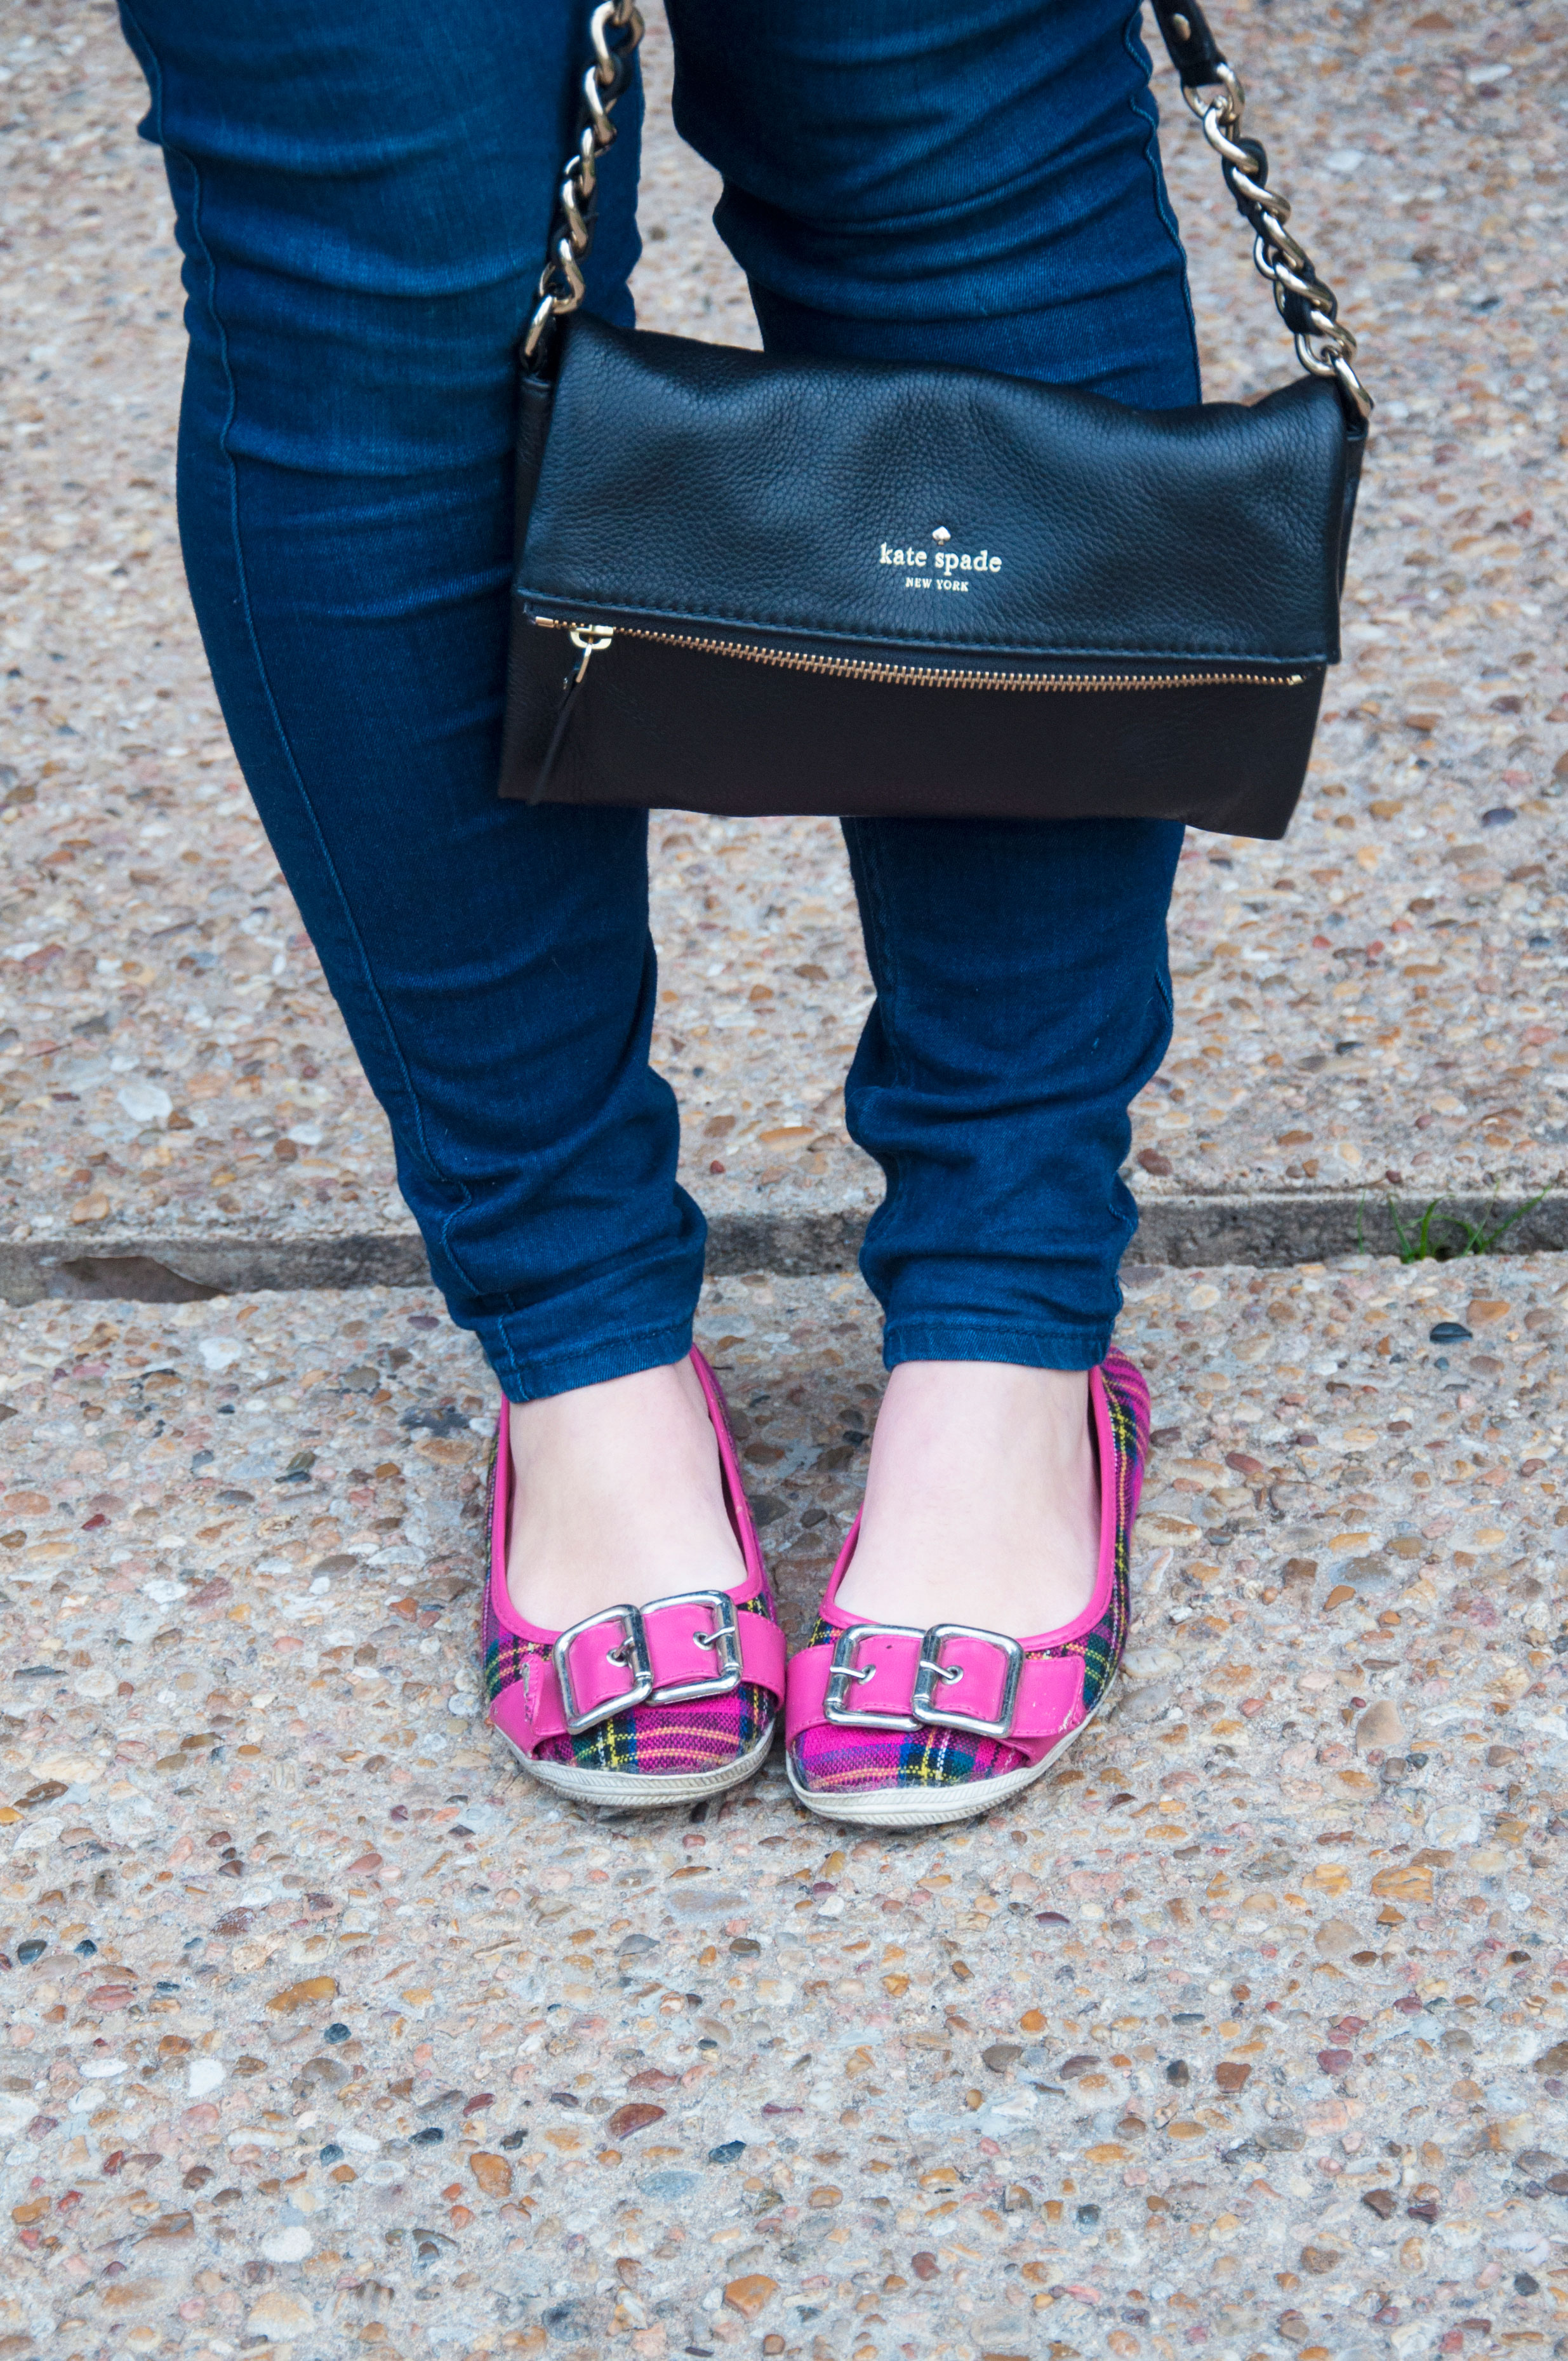 Pink plaid shoes and Kate Spade